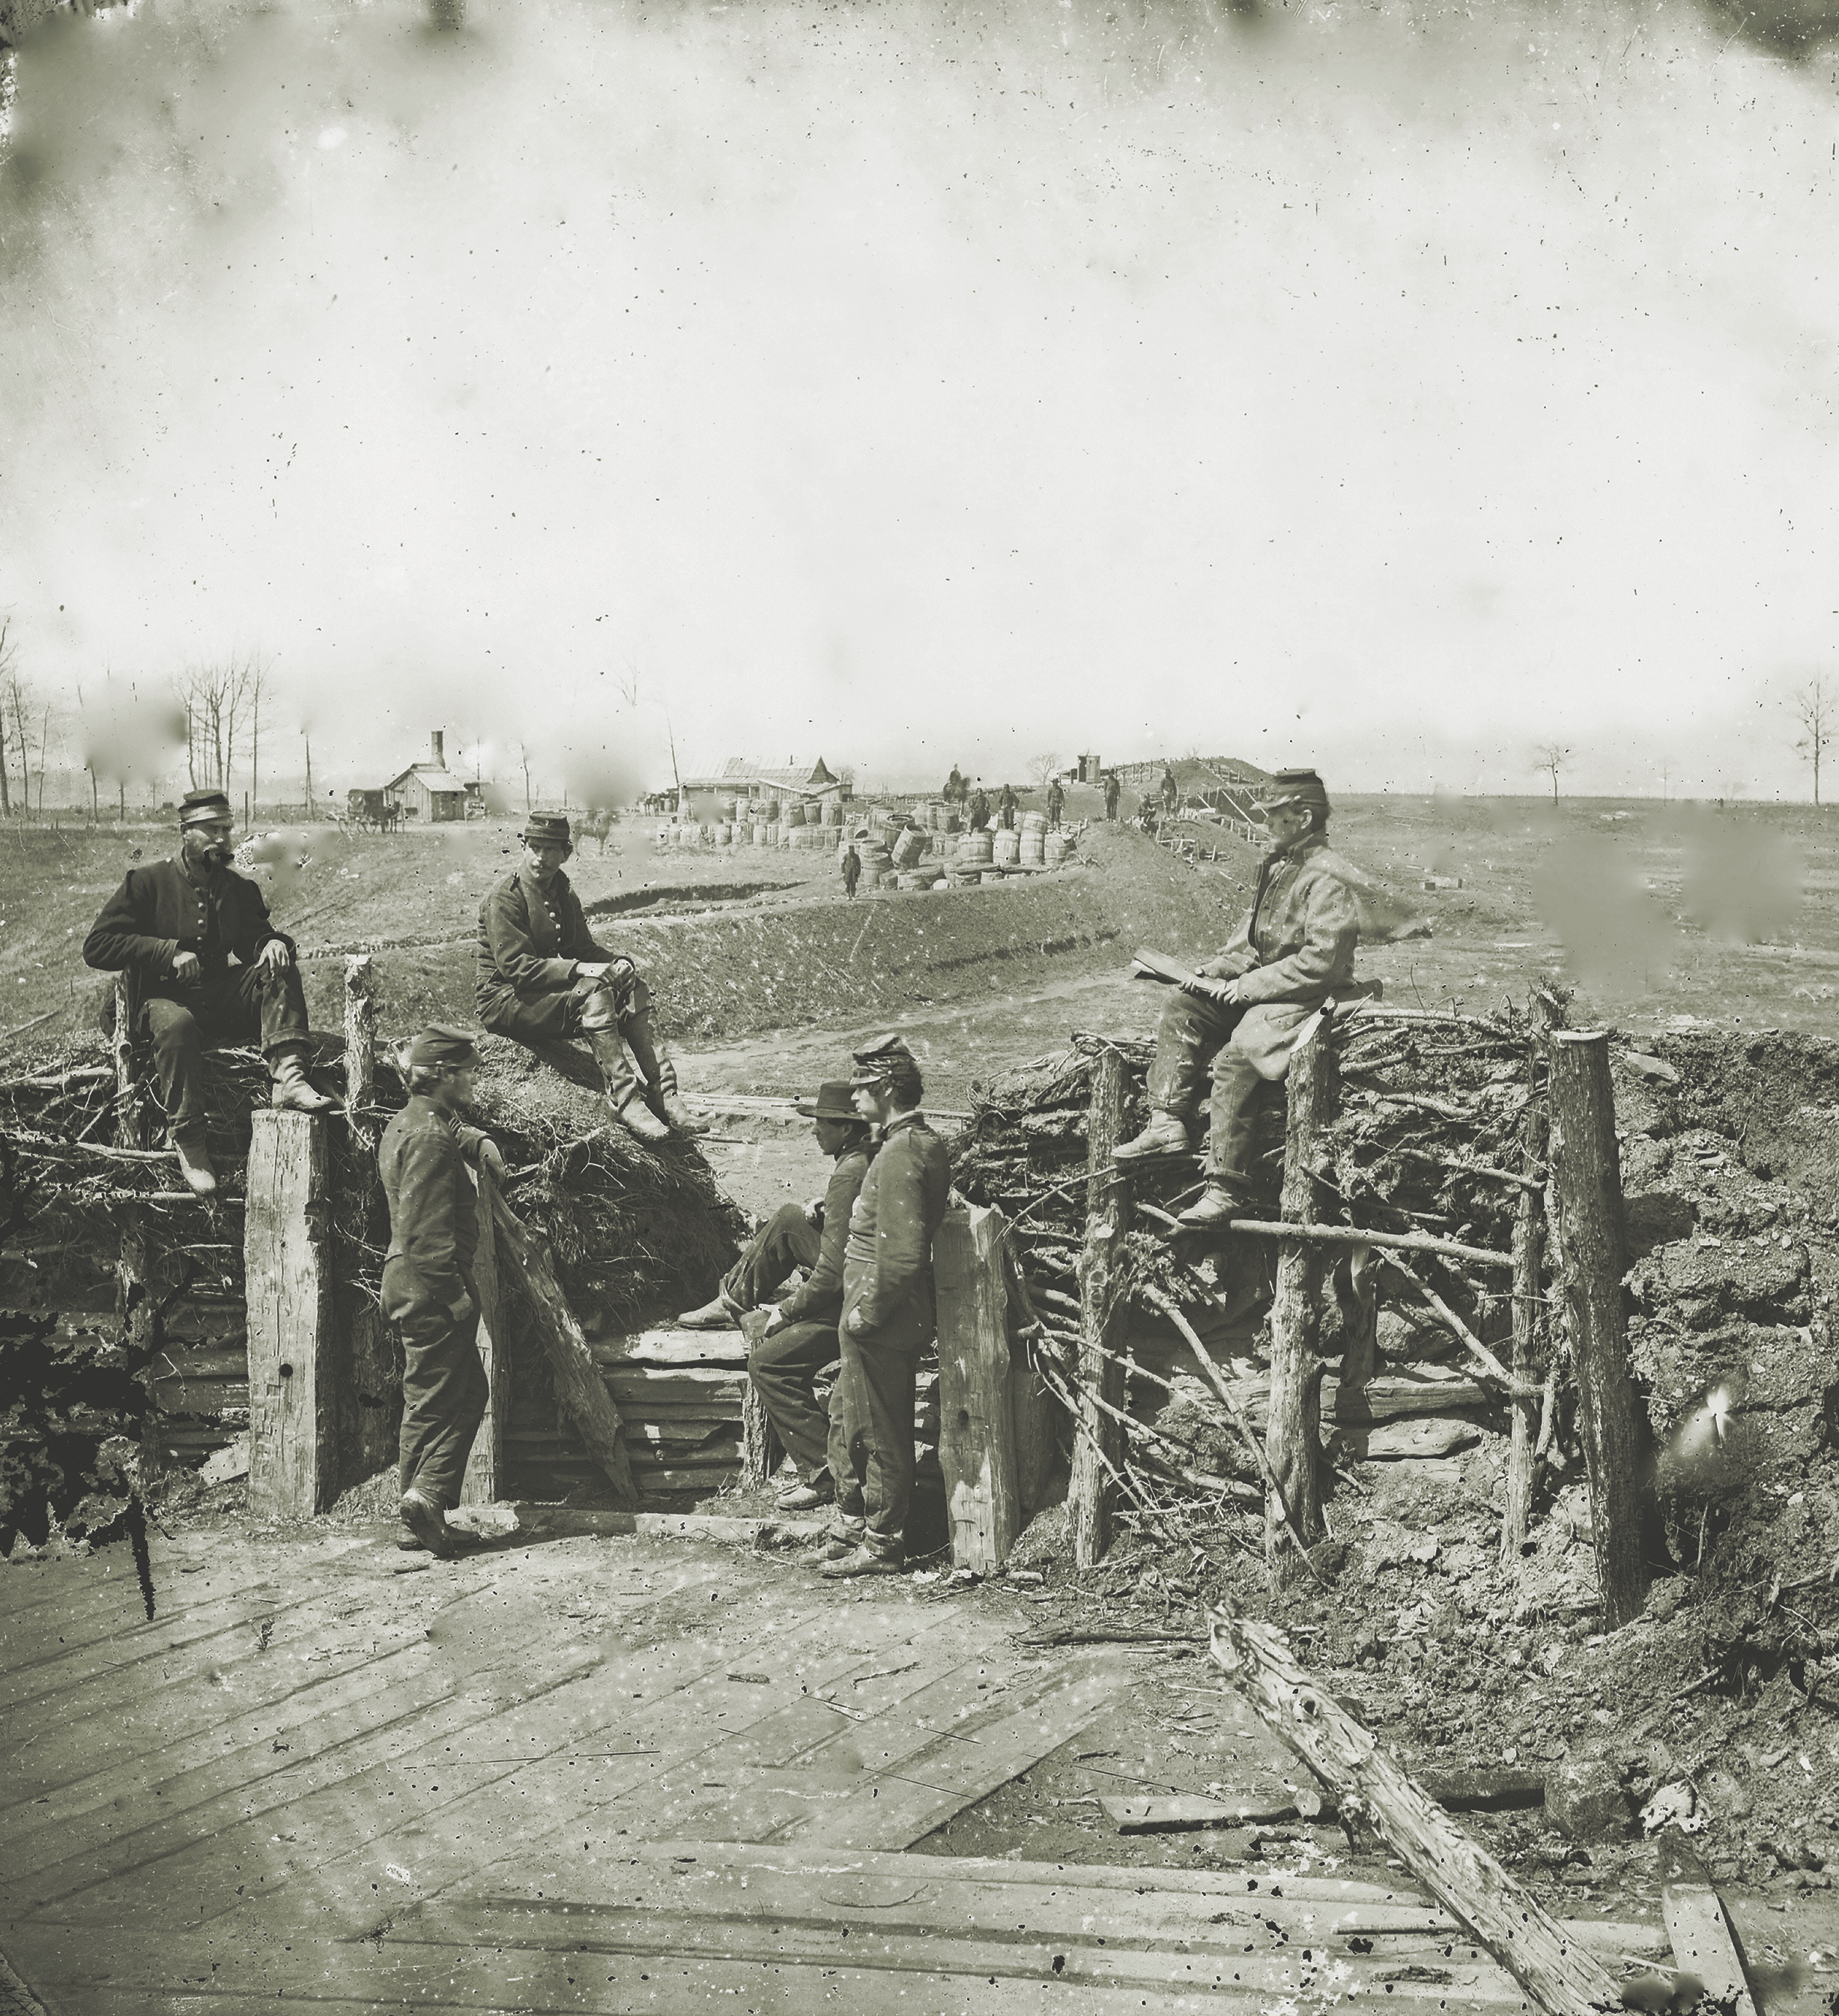 Robert E. Lee, the commander of the Confederate army, sent three divisions under Major General Thomas J. “Stonewall” Jackson to cut the Union’s main supply line at Manassas Junction. (Buyenlarge, Getty Images)